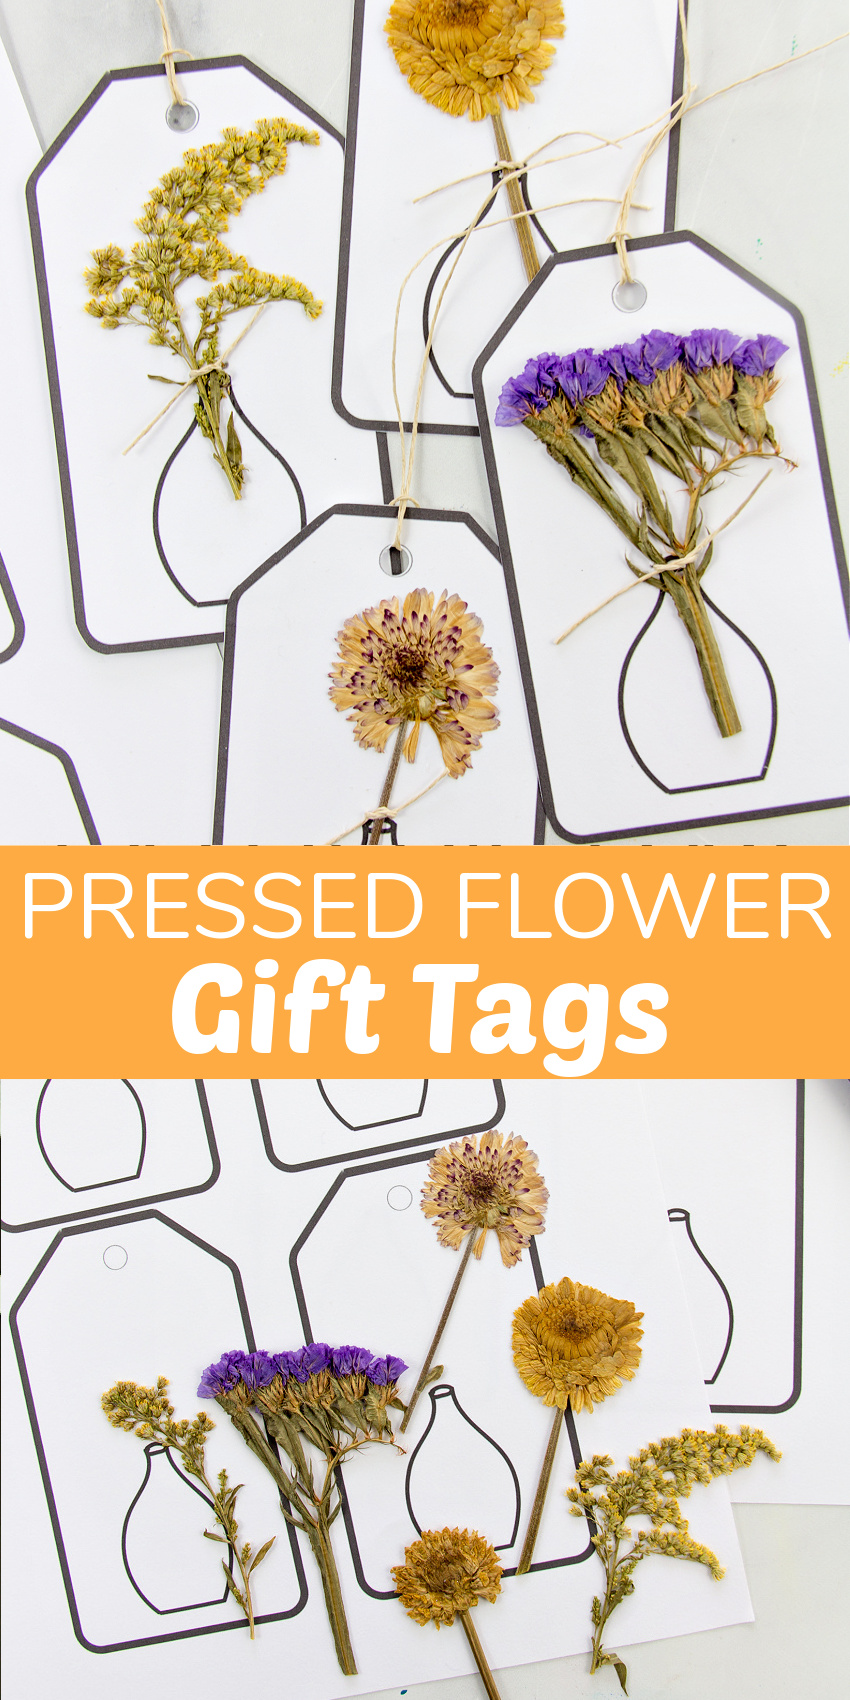 How to make dried flower gift tags: for a unique, floral touch